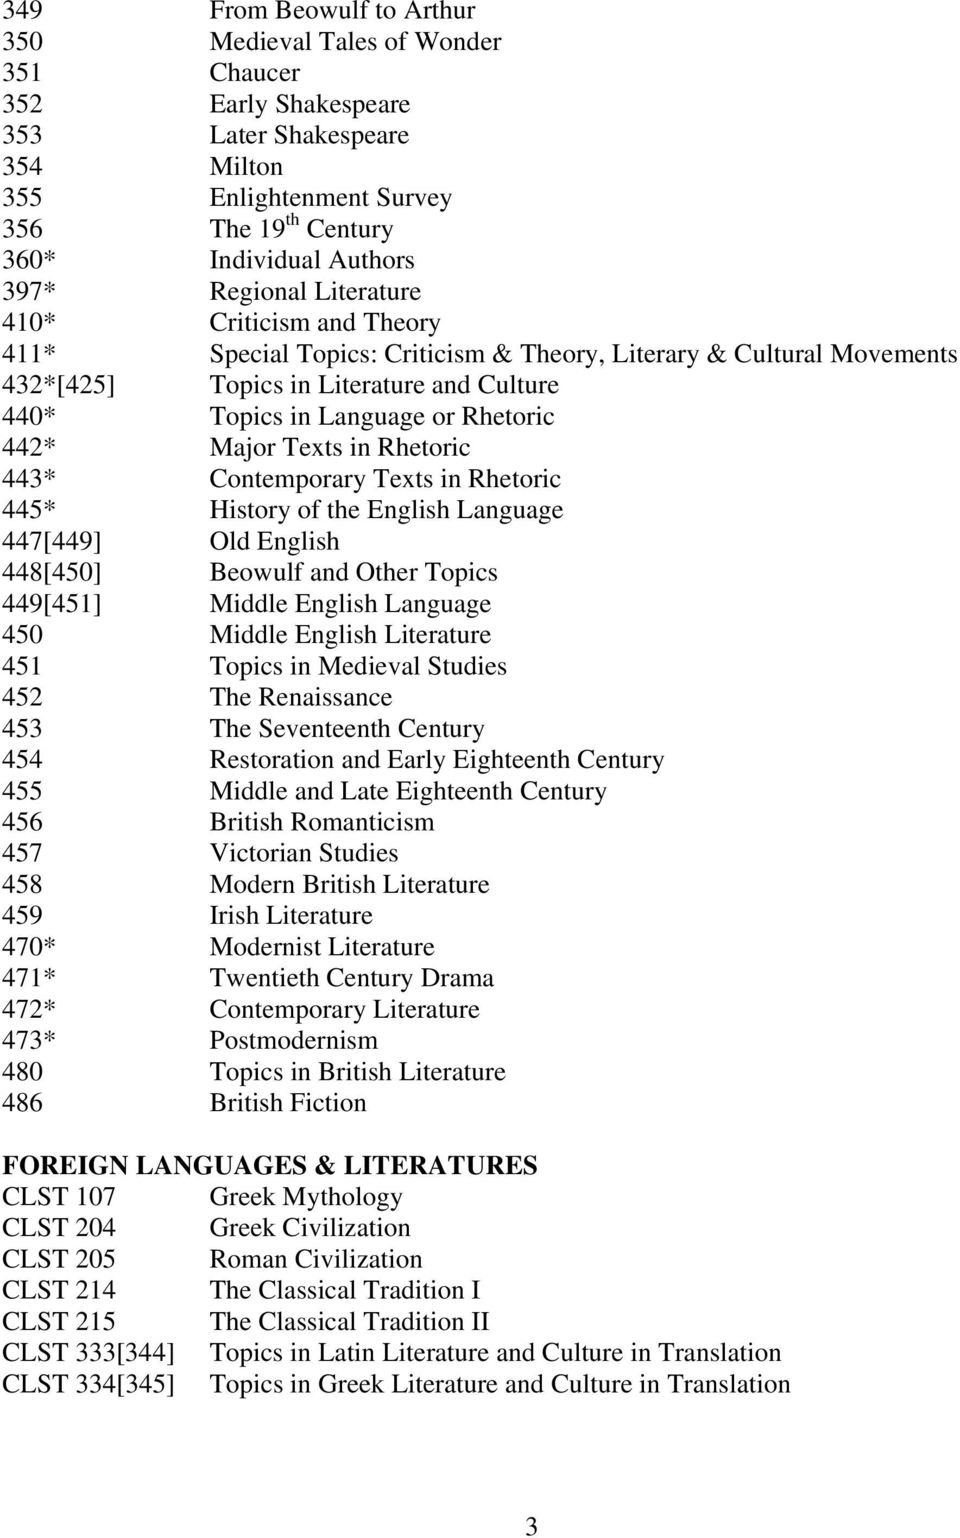 442* Major Texts in Rhetoric 443* Contemporary Texts in Rhetoric 445* History of the English Language 447[449] Old English 448[450] Beowulf and Other Topics 449[451] Middle English Language 450